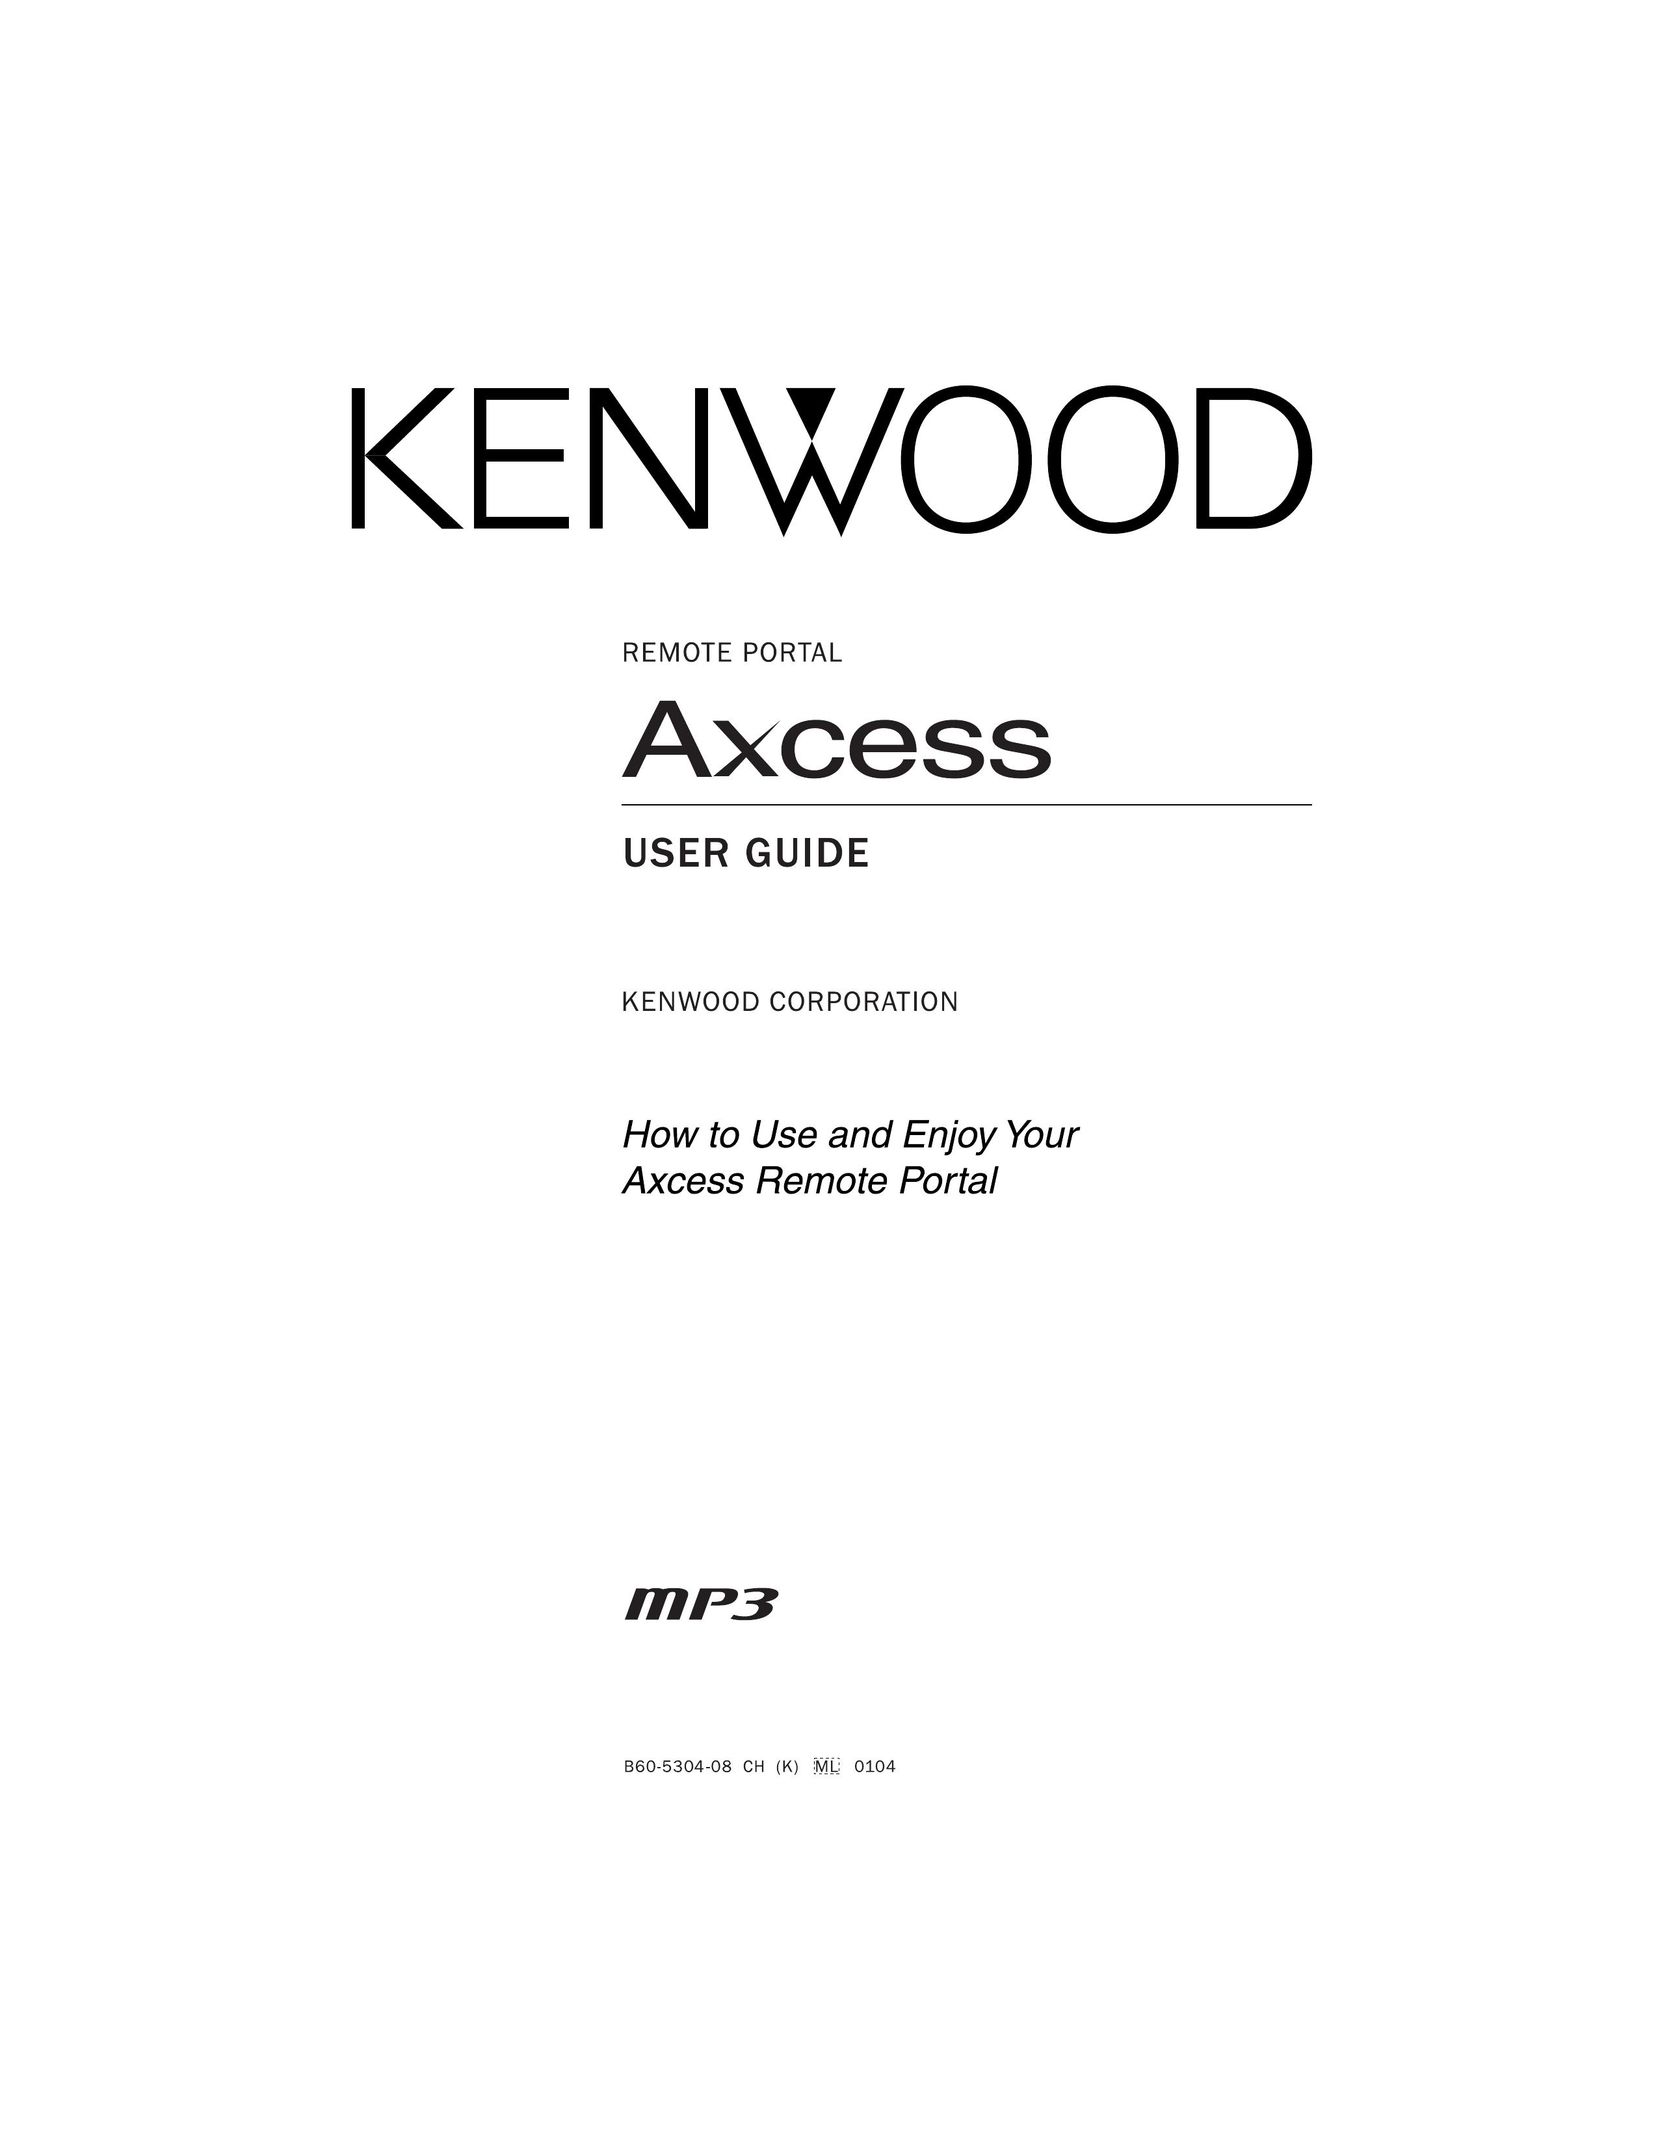 Kenwood REMOTE PORTAL AXCESS Universal Remote User Manual